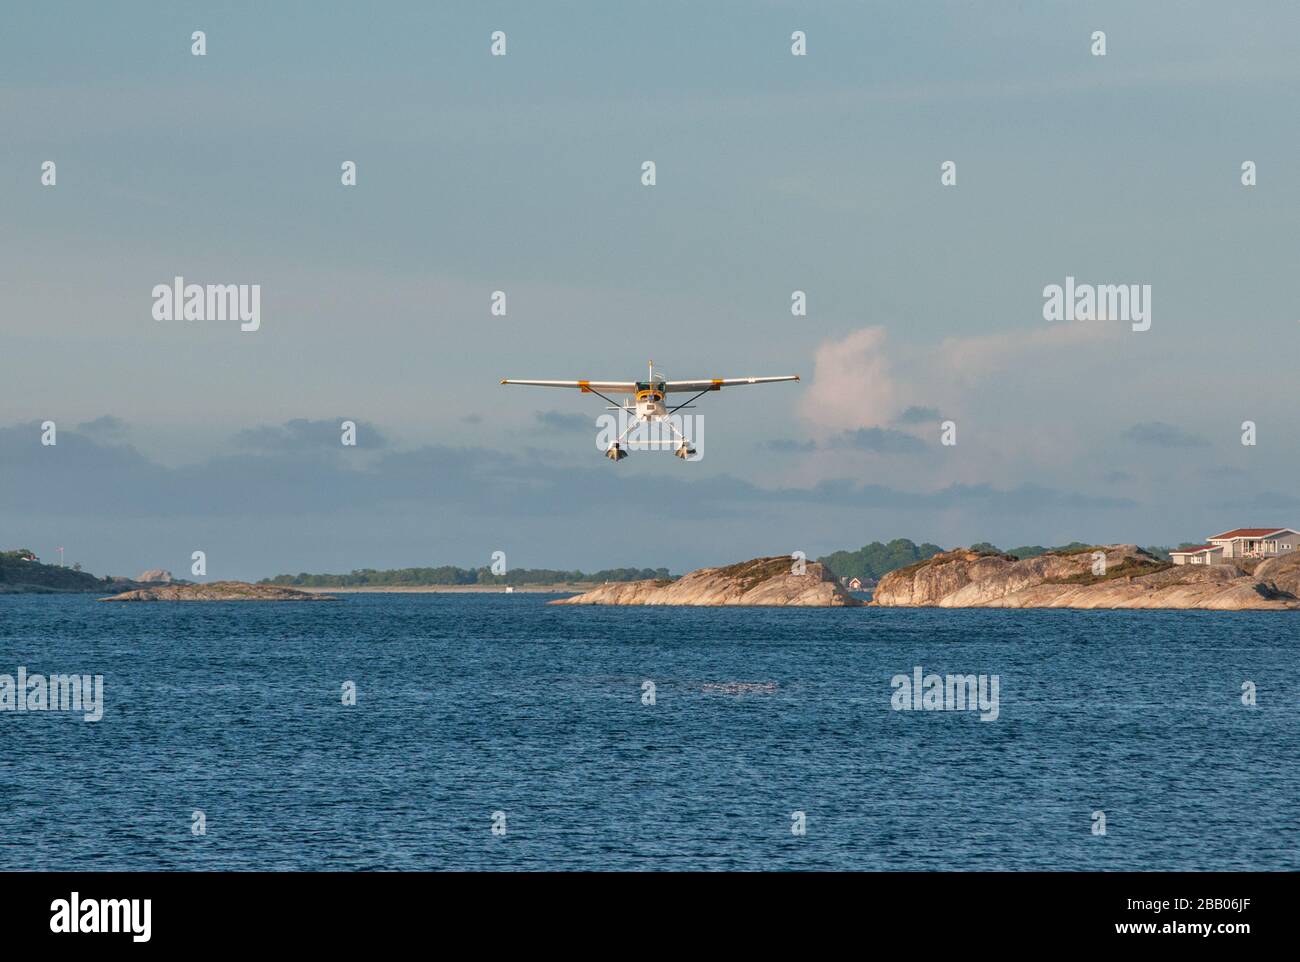 A yellow and white Cessna 172 Skyhawk seaplane taking off among islands in the Kragerø archipelago on south coast of Norway. Stock Photo